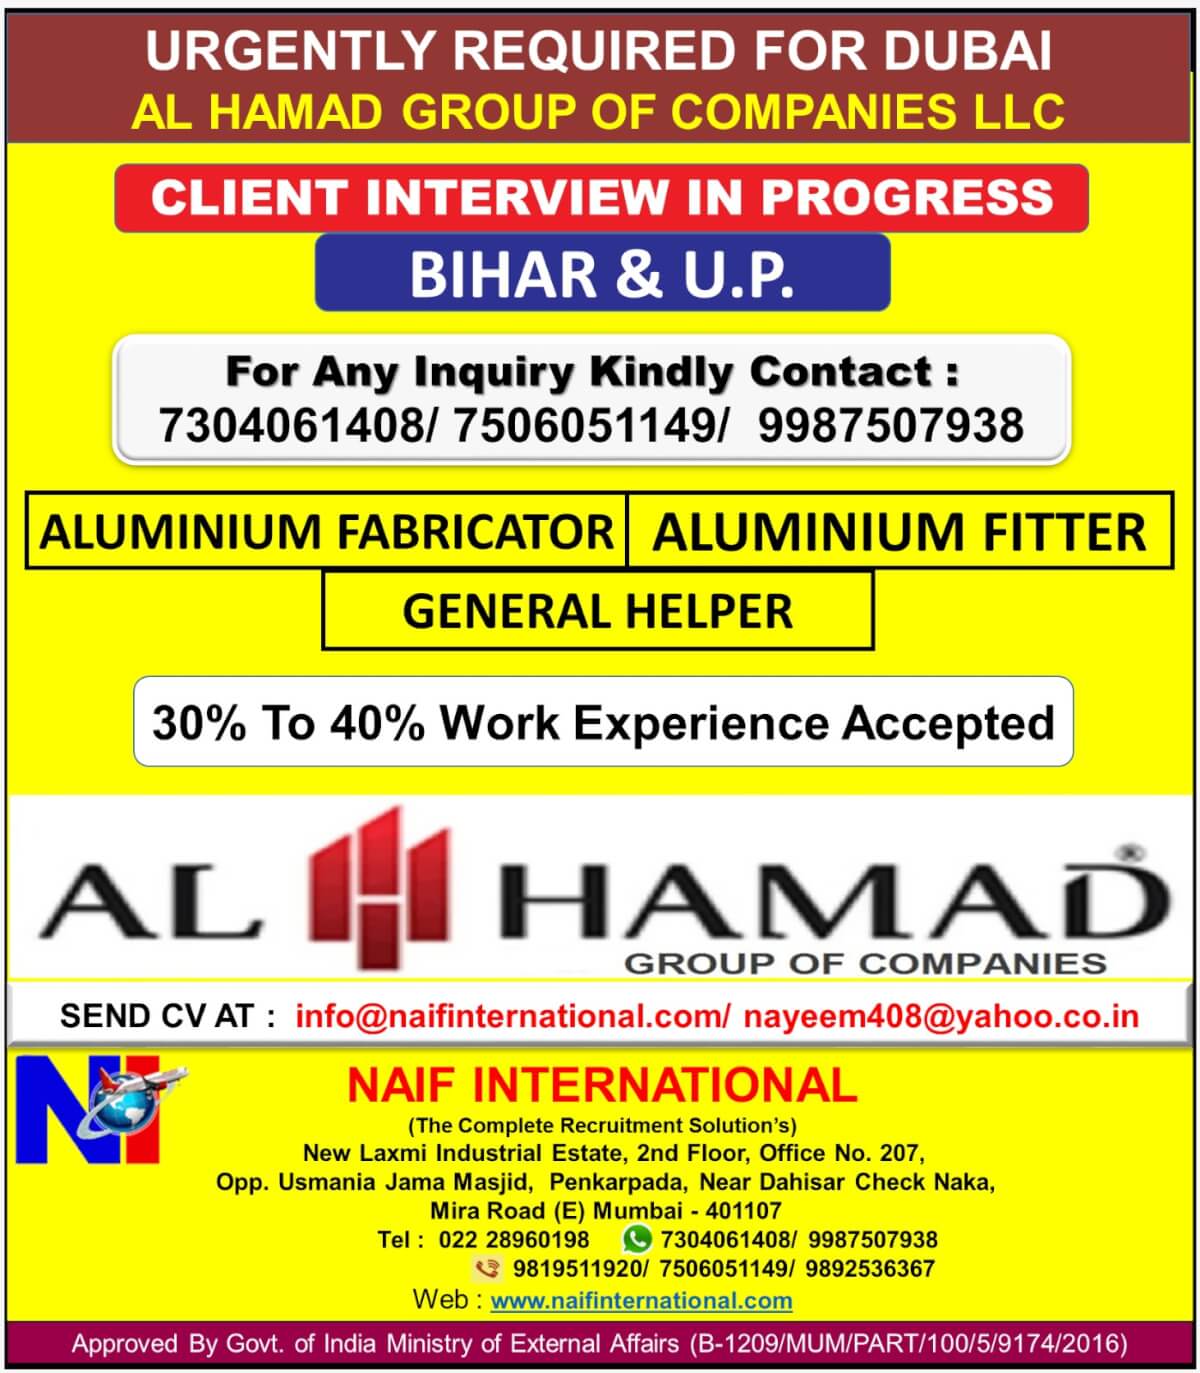 URGENTLY REQUIRED FOR DUBAI AL HAMAD GROUP OF COMPANIES LLC